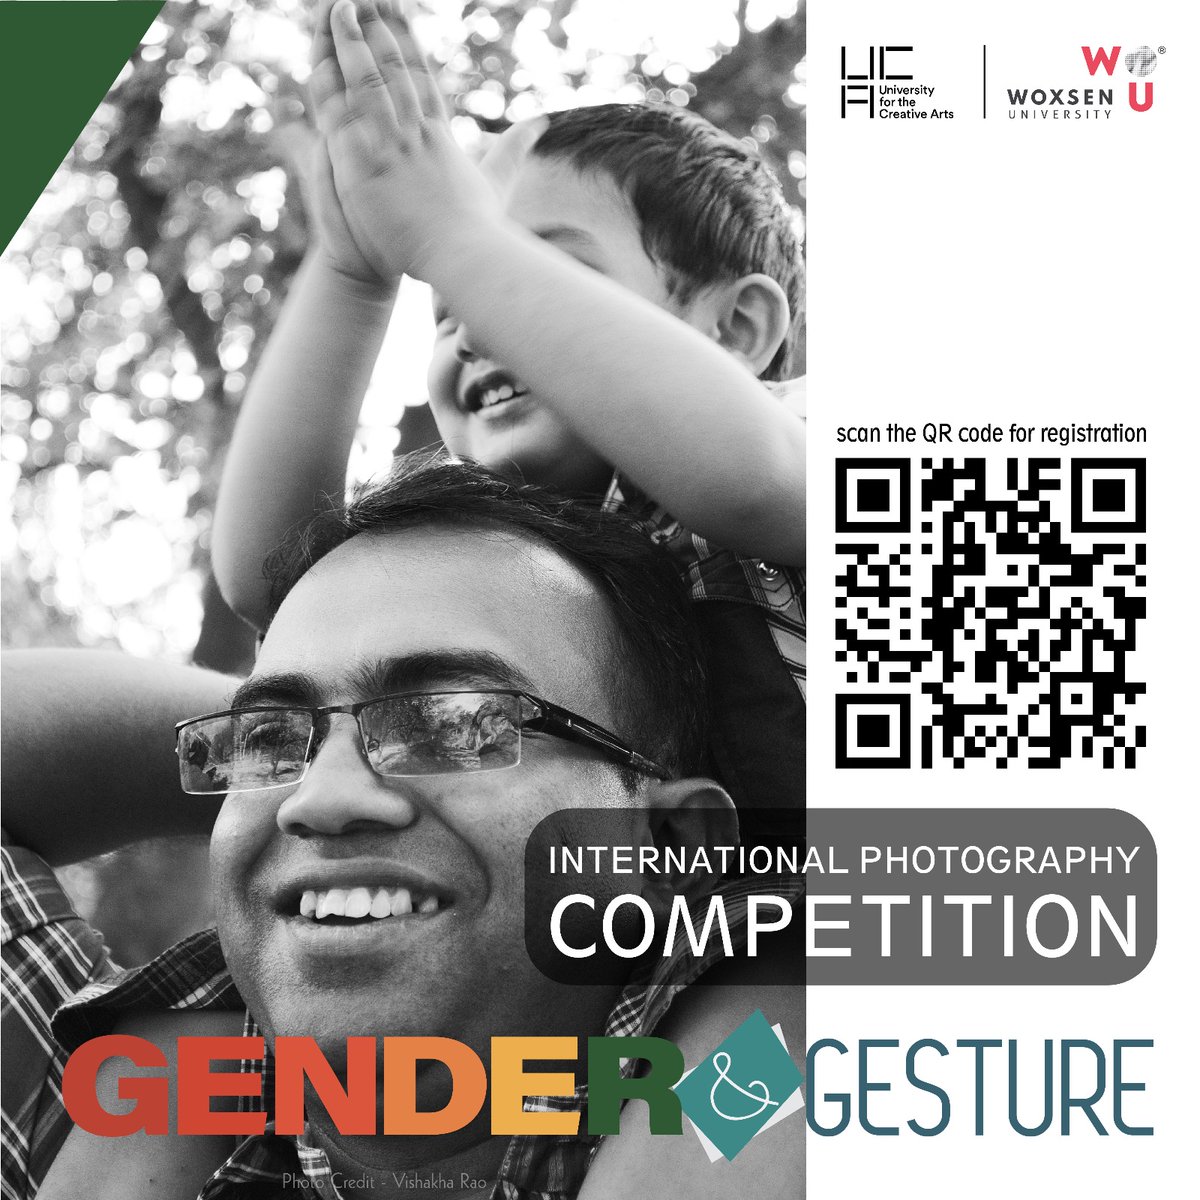 School of Arts and Design and the University for Creative Arts, UK, brings to you an International Photography Competition on Gender & Gesture: Thinking Photography Beyond the Visual

Register: lnkd.in/dHSzm36Z

#woxsenuniversity #photography #visualcommunication